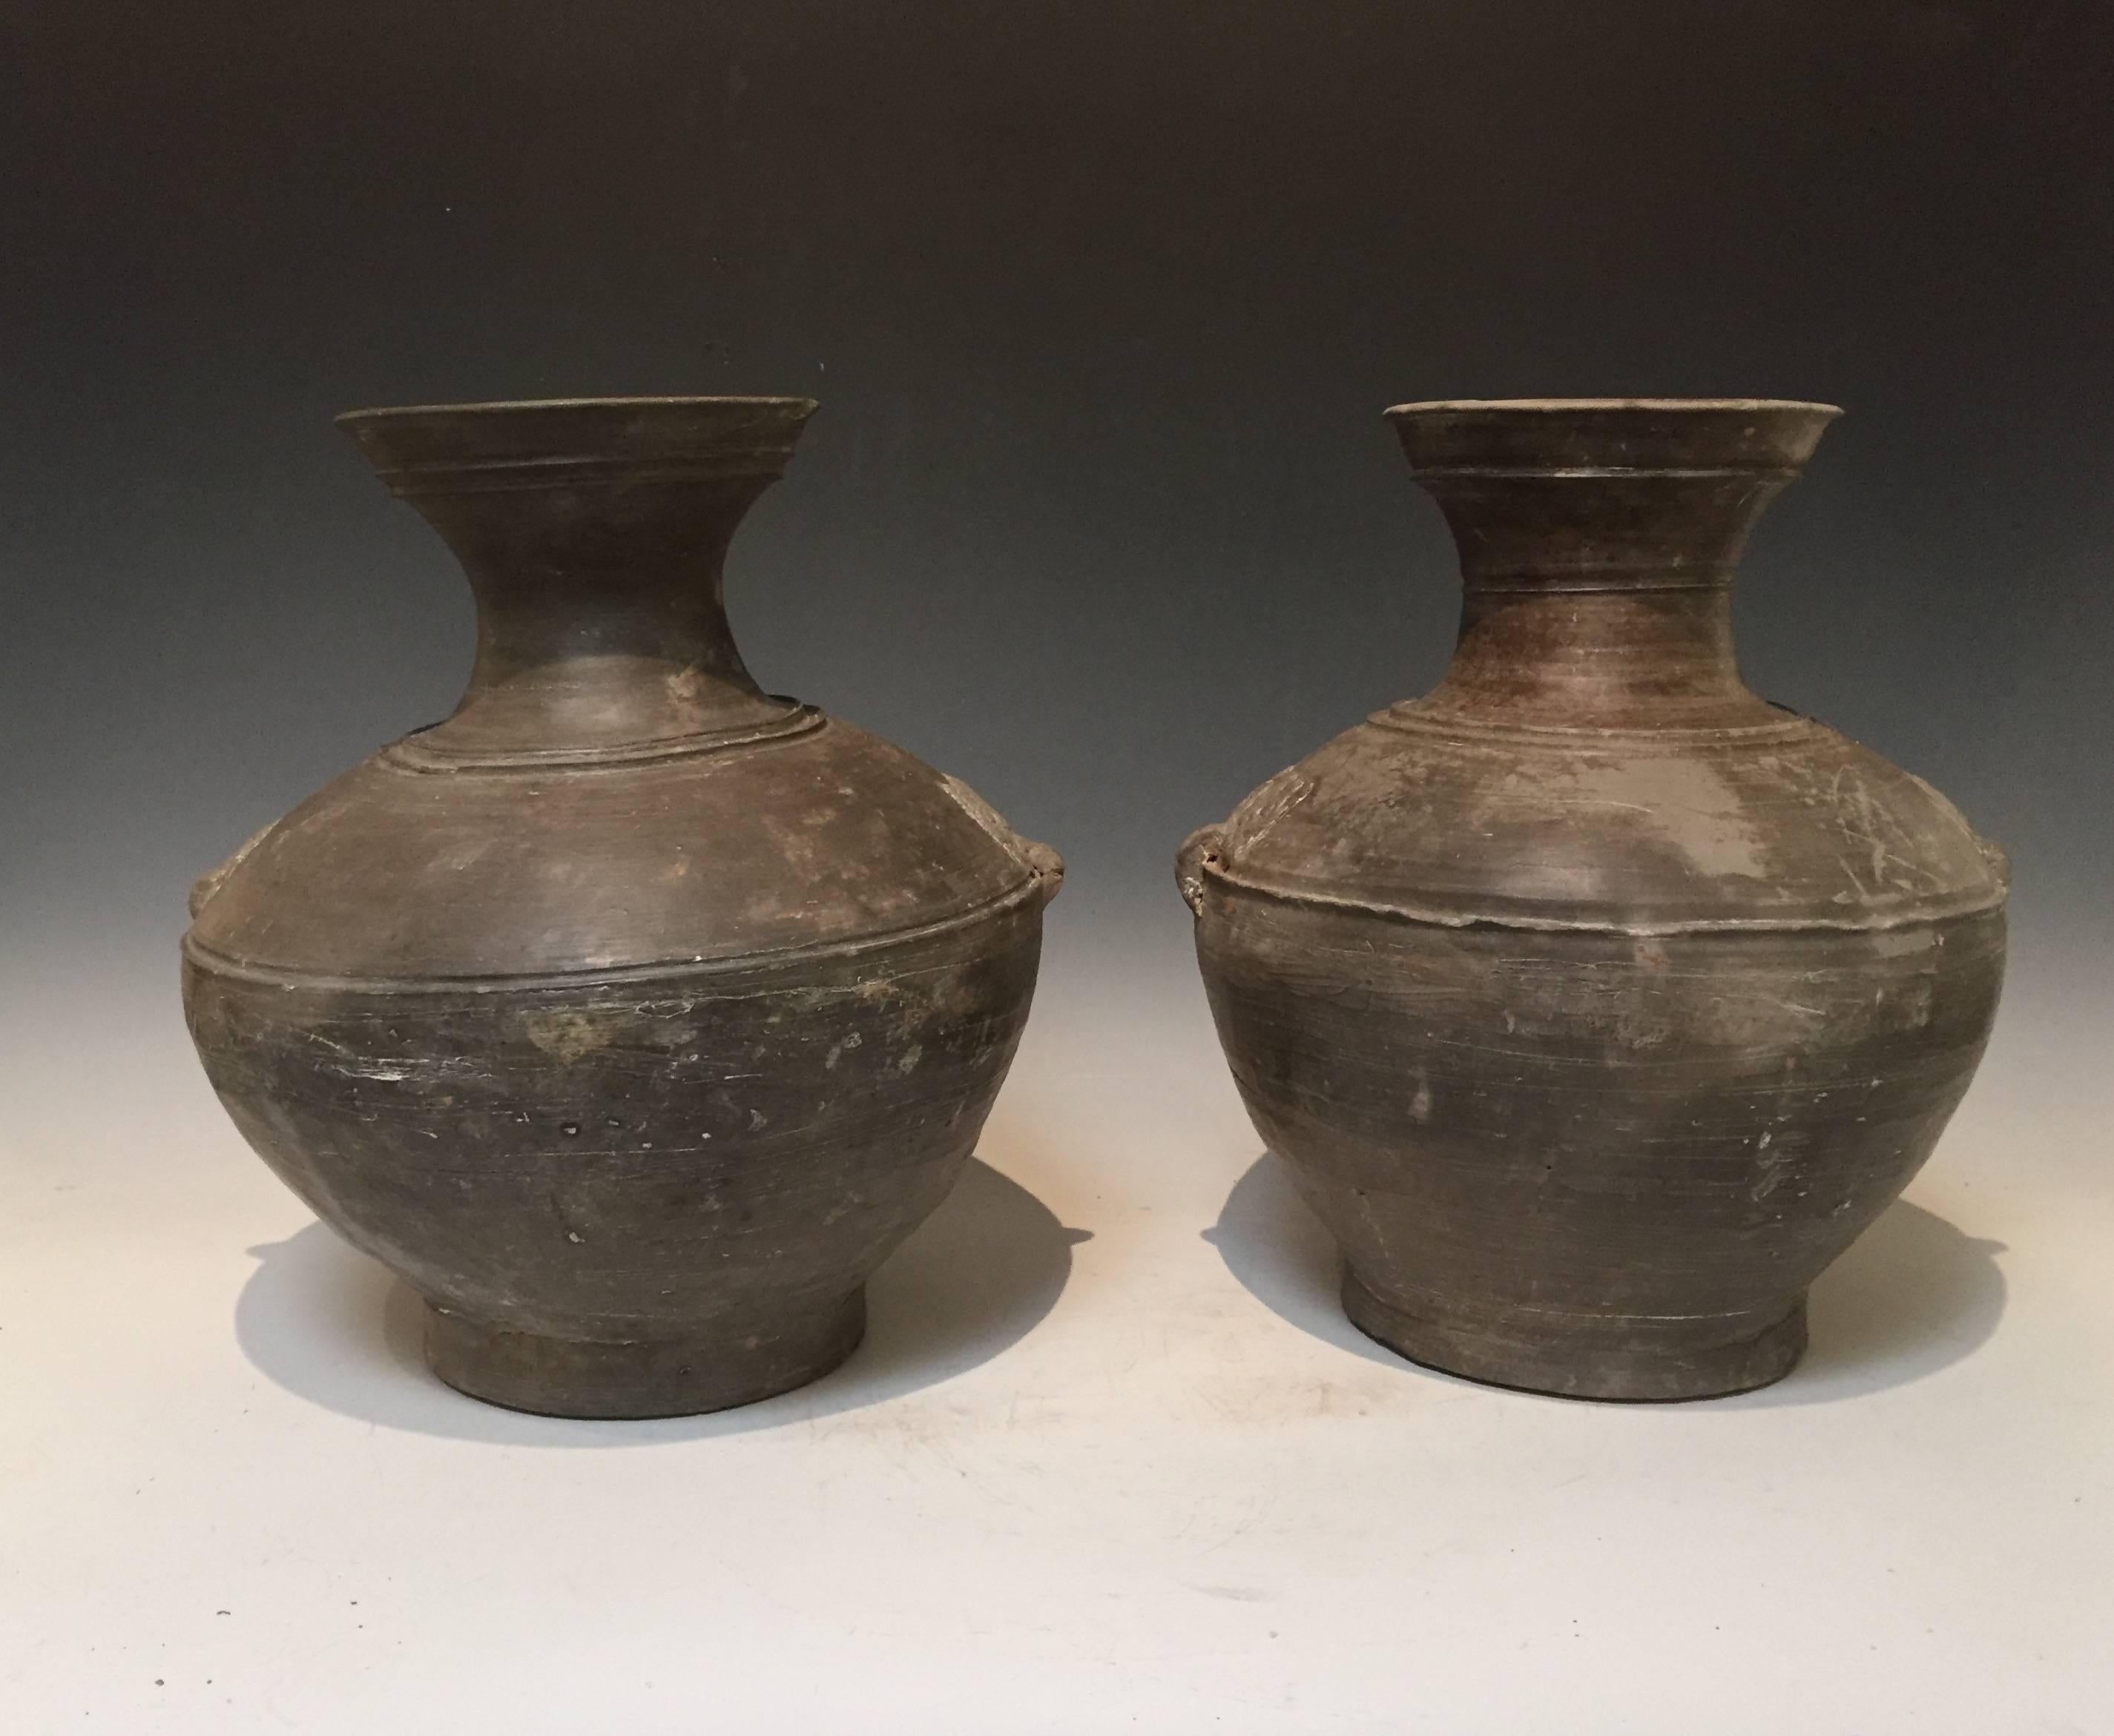 Offered by J R Richards
Pair of Han Dynasty Grey Pottery Jars. 14